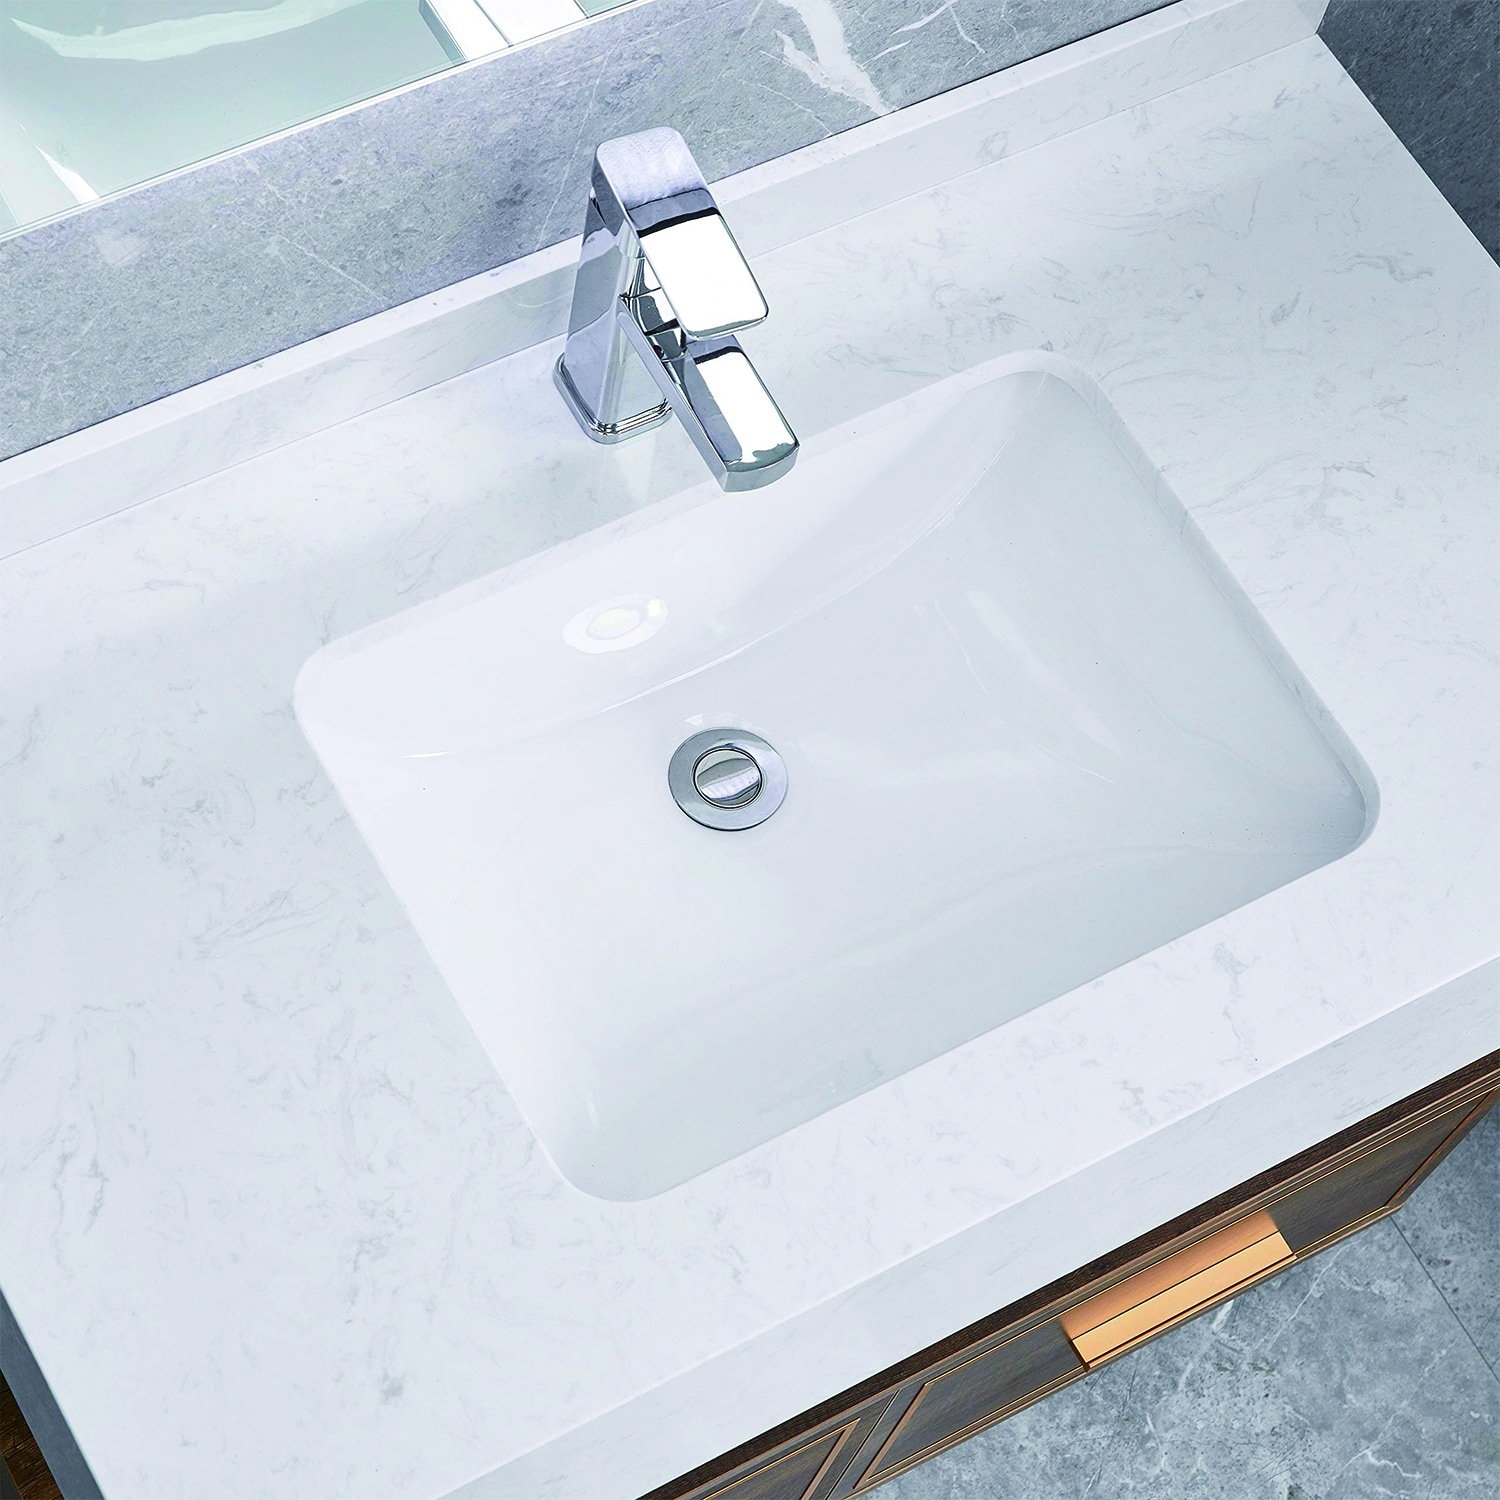 32in W X 17in D Console Bathroom Sink Ceramic Rectangular with Overflow in  White Basin